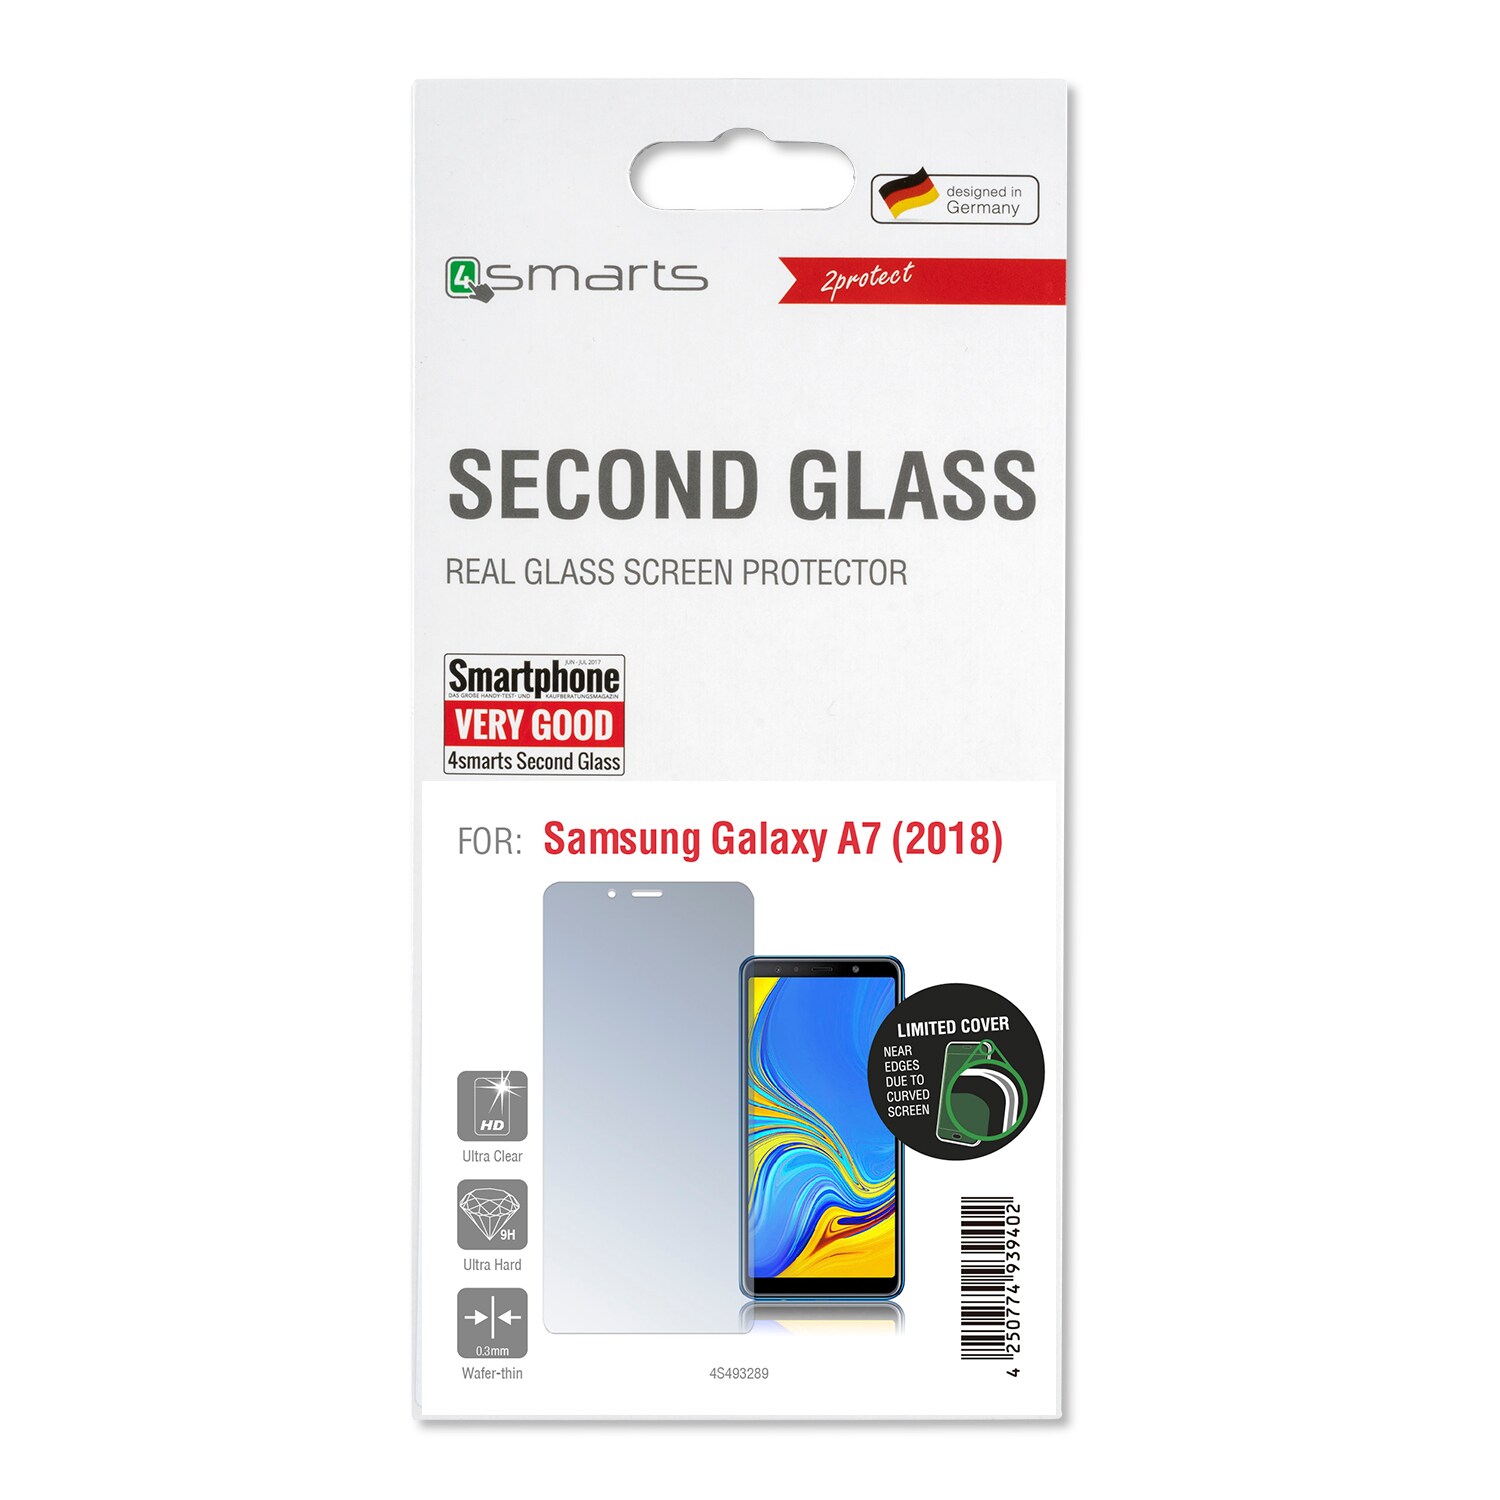 4smarts Second Glass Limited Cover for Samsung Galaxy A7(2018)